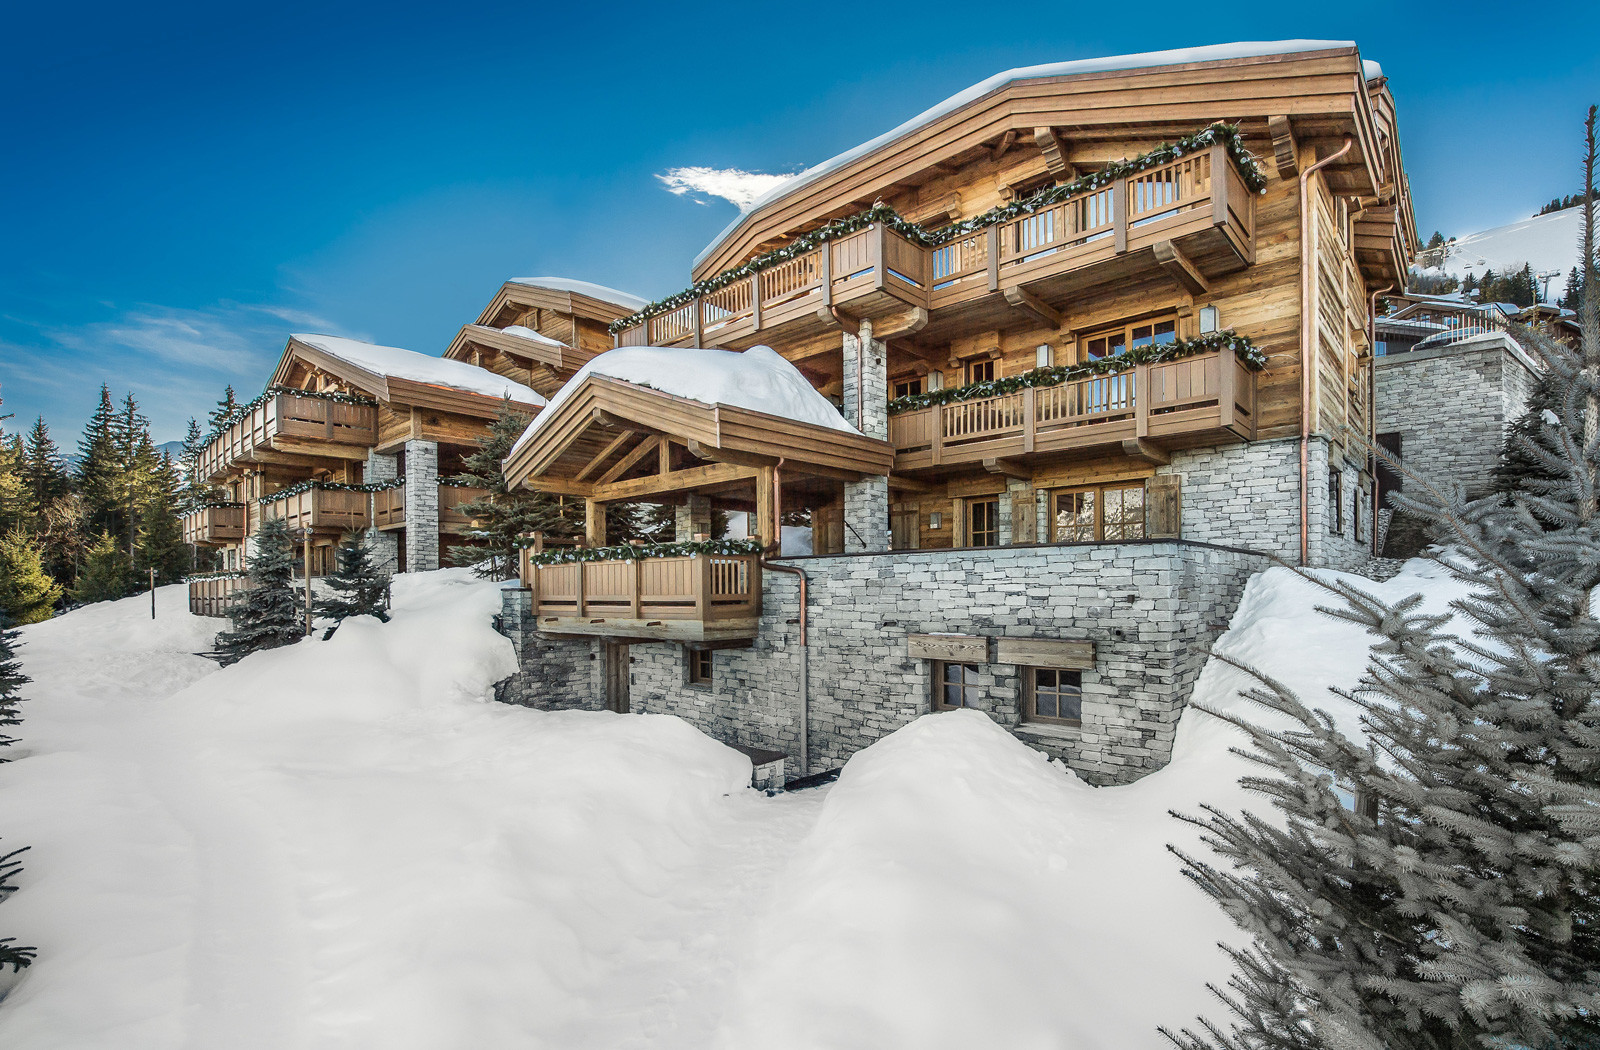 Kings-avenue-courchevel-sauna-jacuzzi-hammam-swimming-pool-cinema-games-room-gym-boot-heaters-fireplace-skii-in-skii-out-wine-cellar-parking-lift-area-courchevel-017